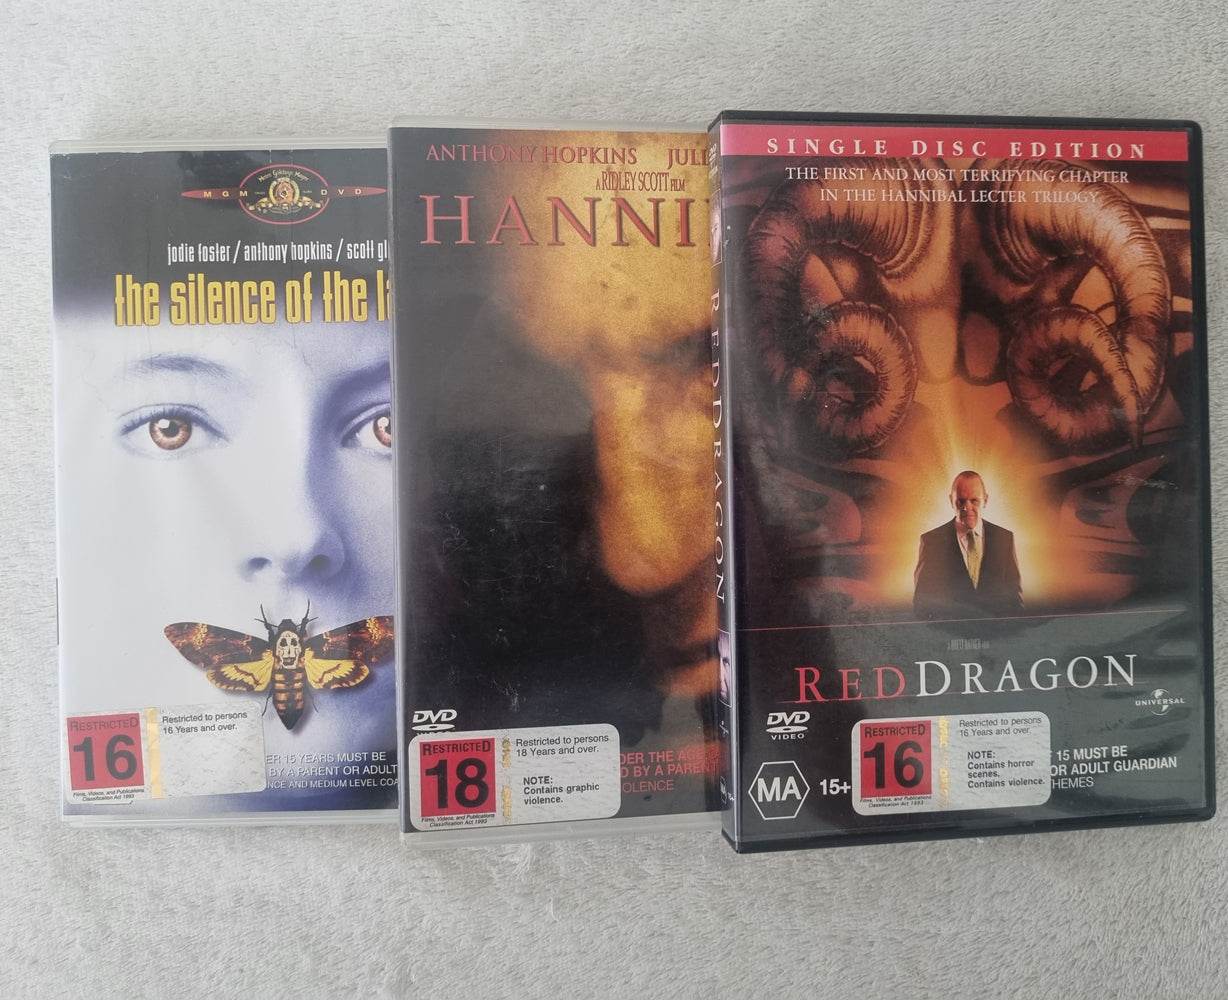 Silence of the Lambs / Hannibal / Red Dragon (Hannibal Lecter Trilogy)